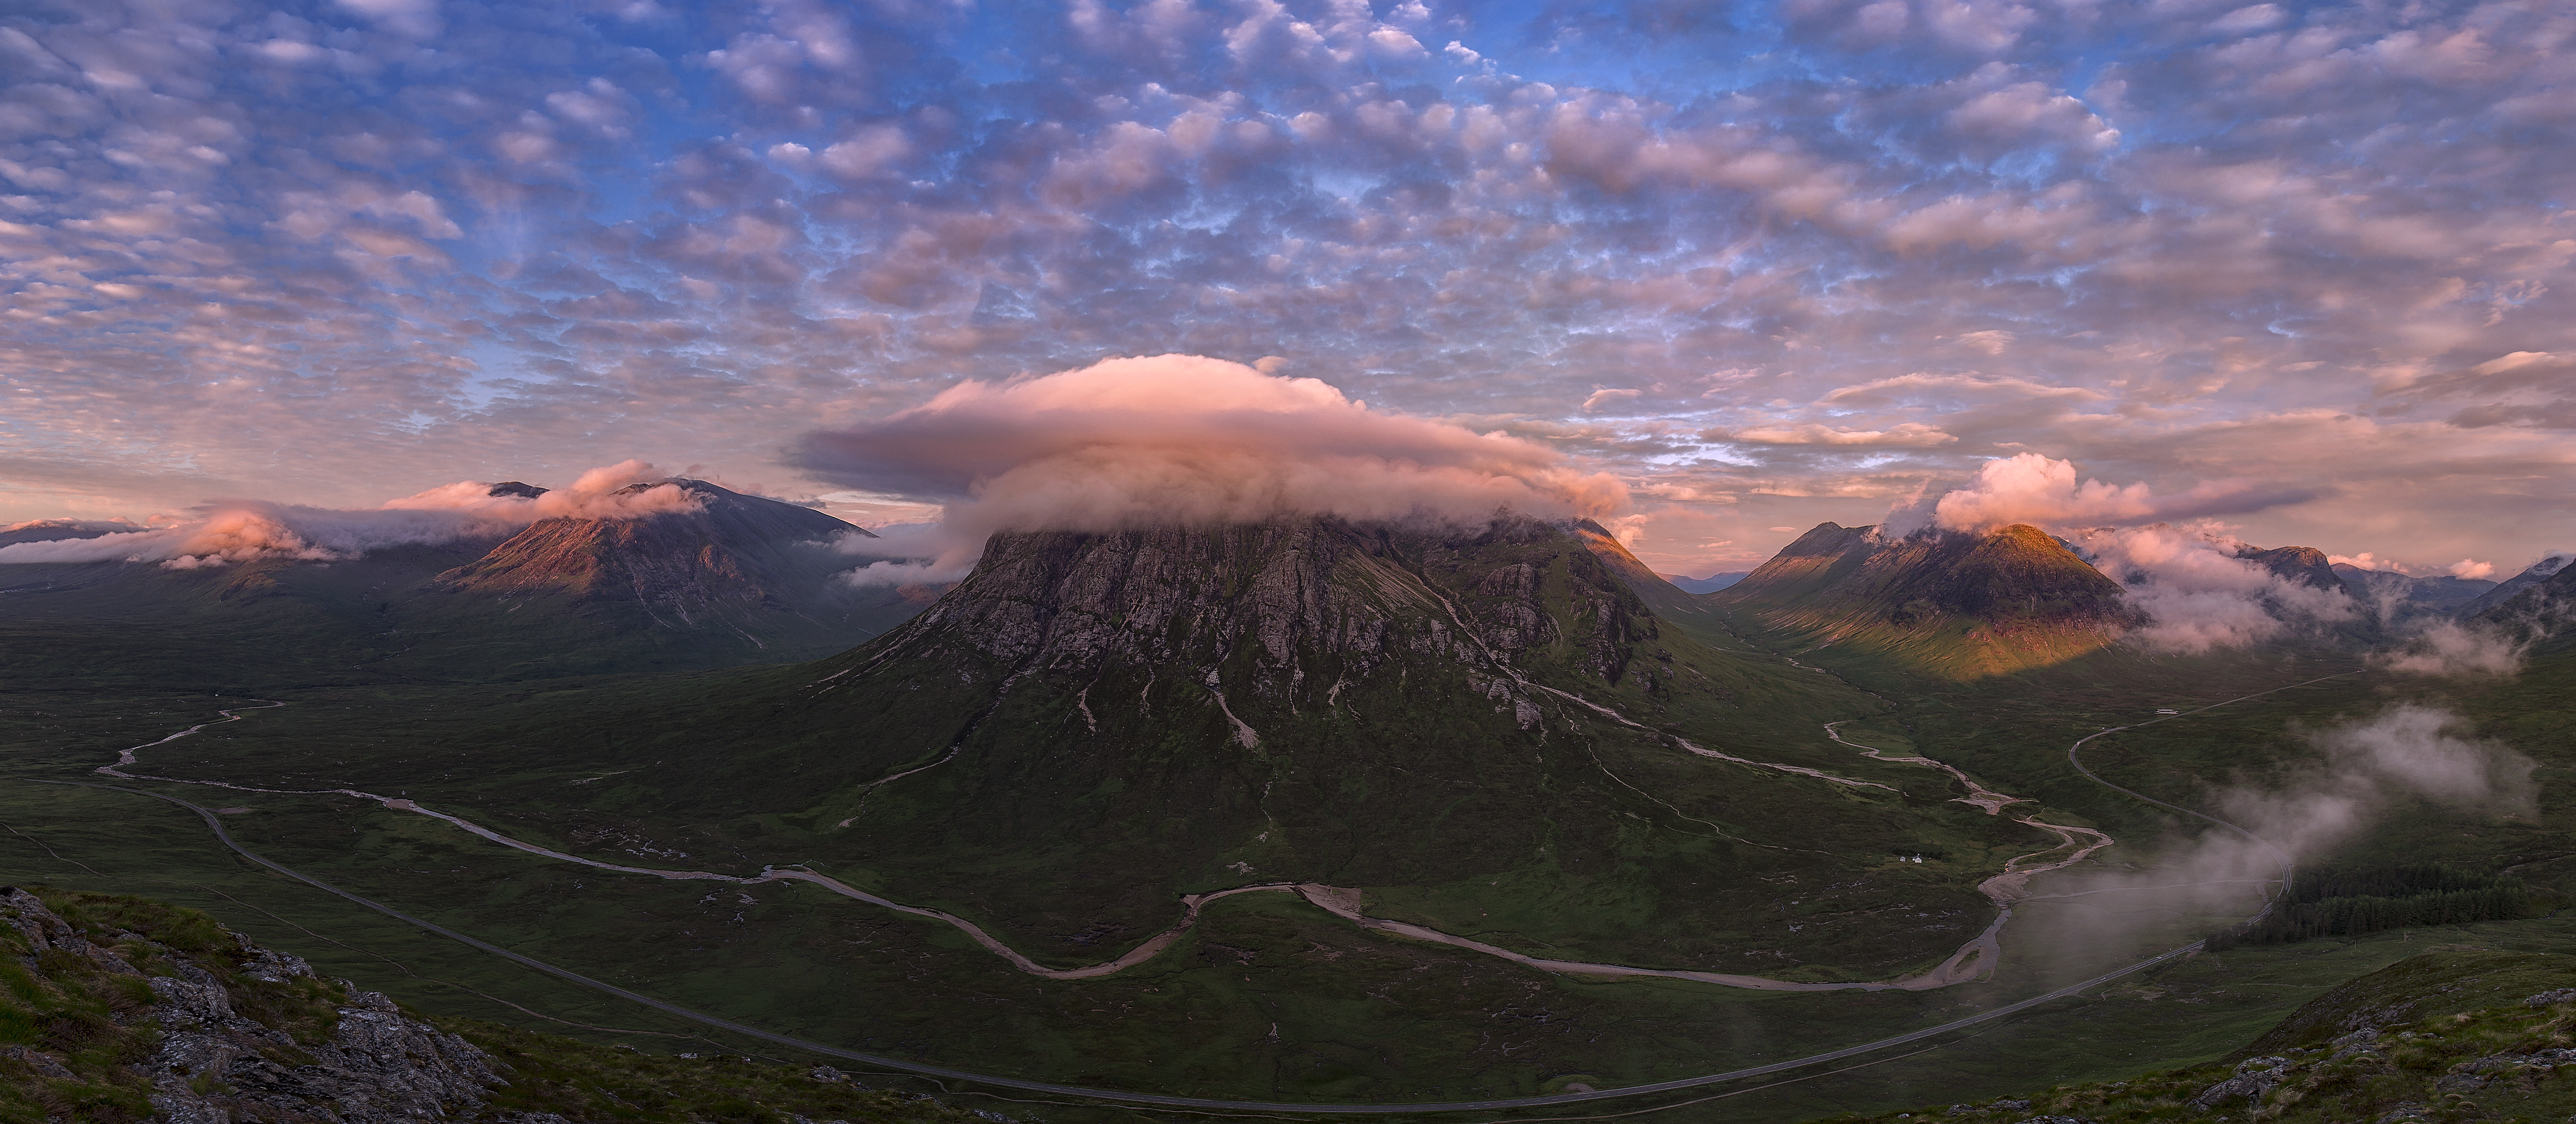 Fog and Clouds over Mountain Range by John McSporran